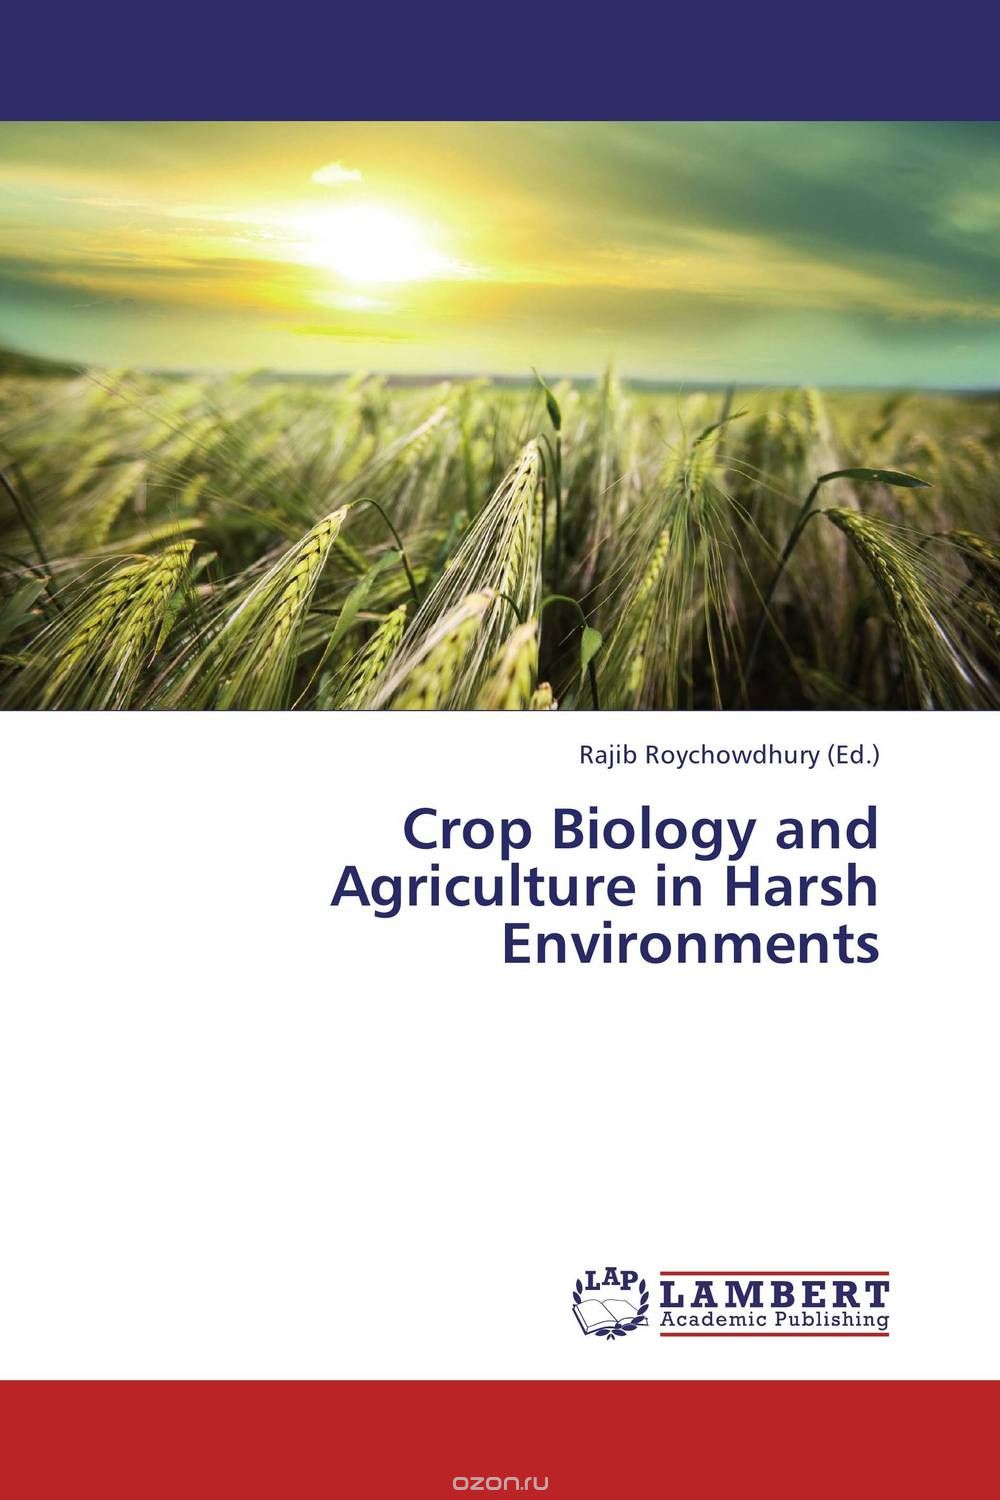 Скачать книгу "Crop Biology and Agriculture in Harsh Environments"